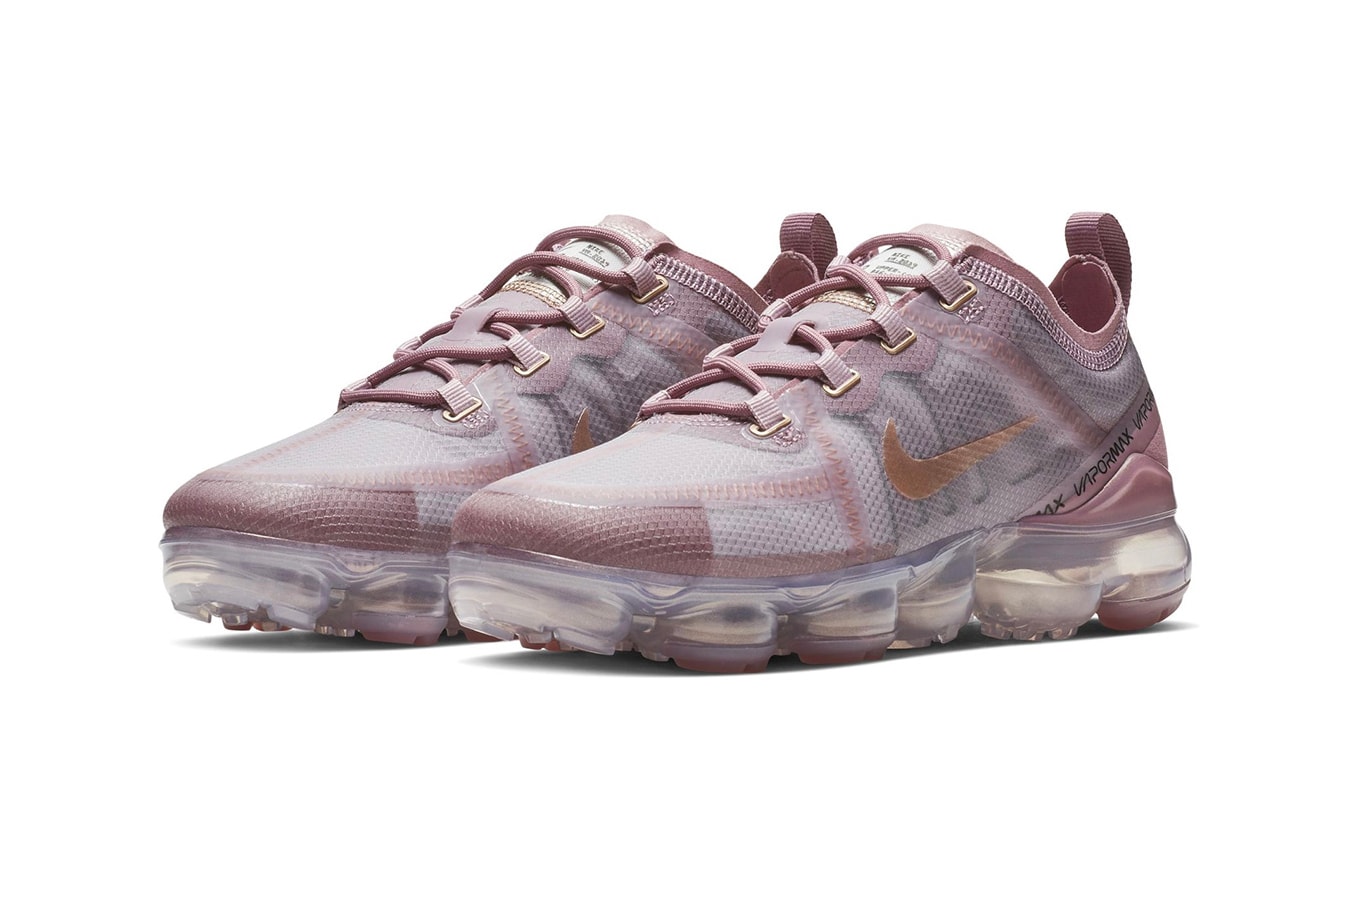 Nike Air VaporMax 2019 pink first look 2019 release info sneakers 